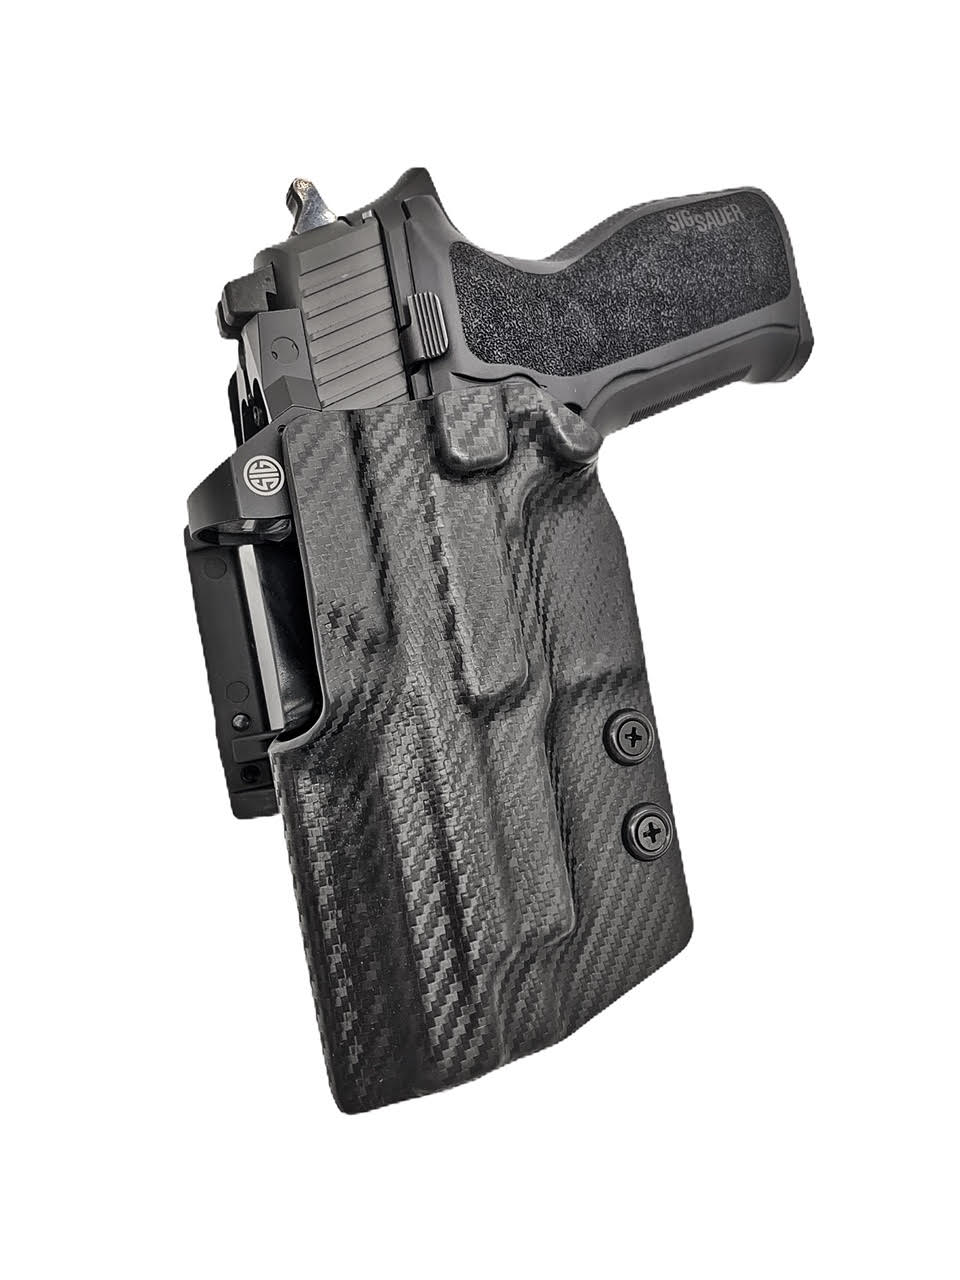 Sig Sauer P226 Action Sport Holster - DARA HOLSTERS  GEAR